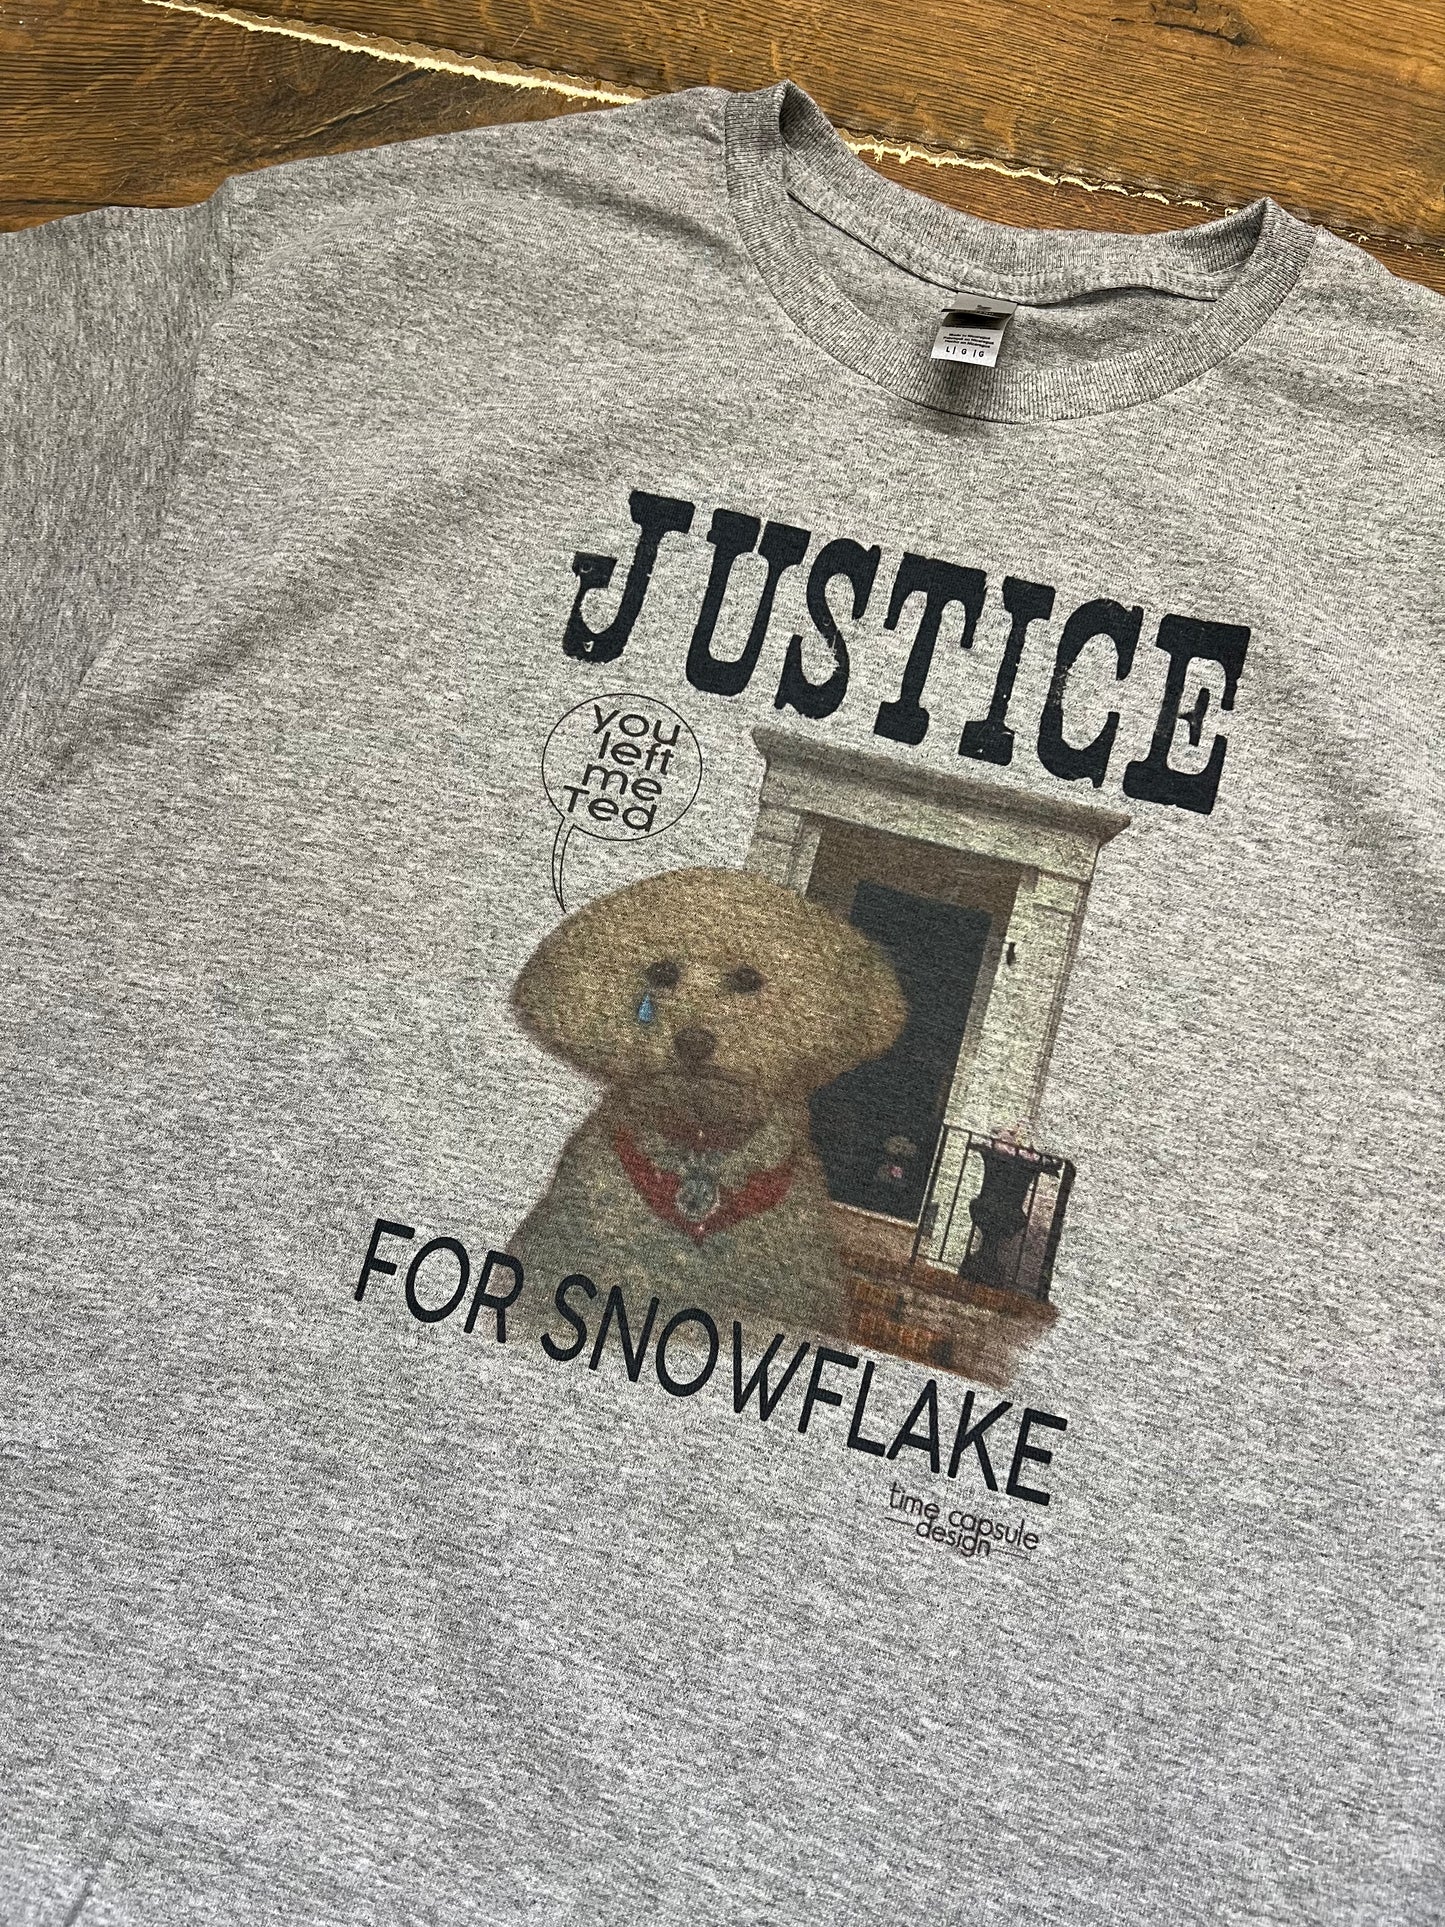 Justice for Snowflake Shirt